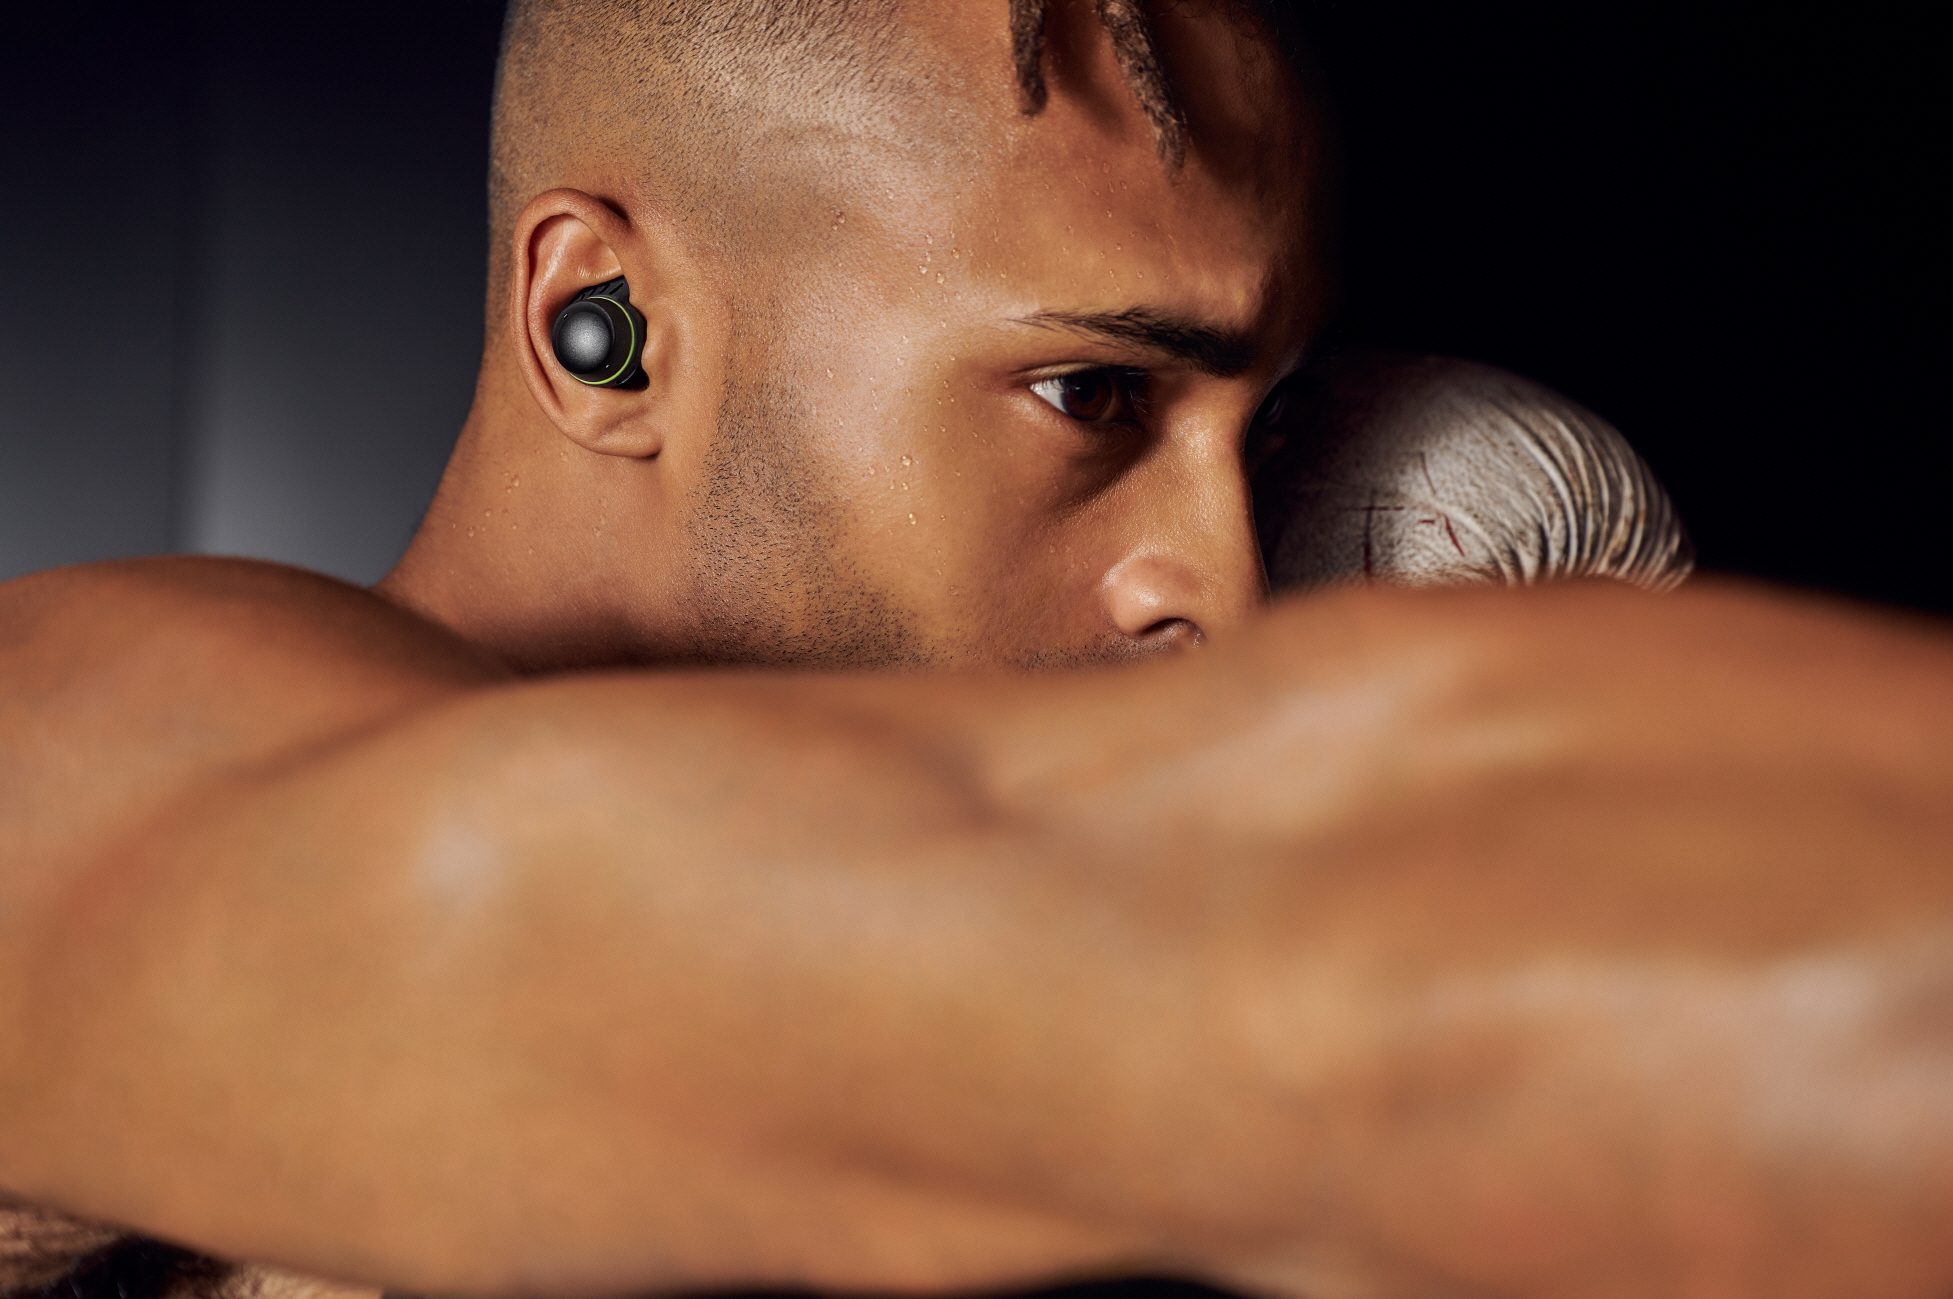 A boxer using LG TONE Free fit during a workout thanks to its secure and comfortable fit.